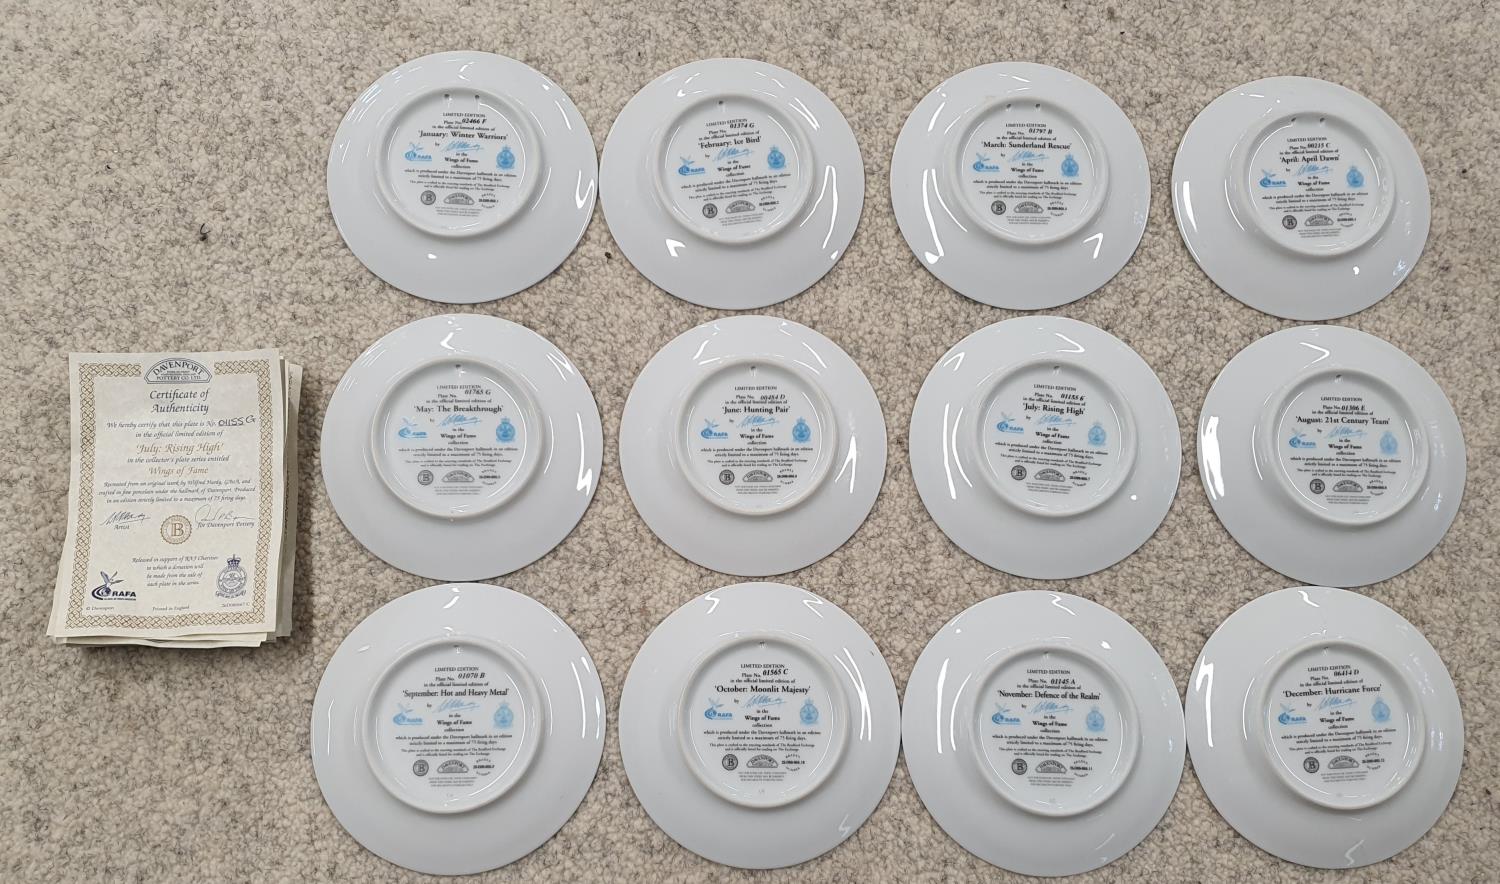 A full Set of Davenport 'Wings of Fame' Collectors Plates. With certs. - Image 2 of 2